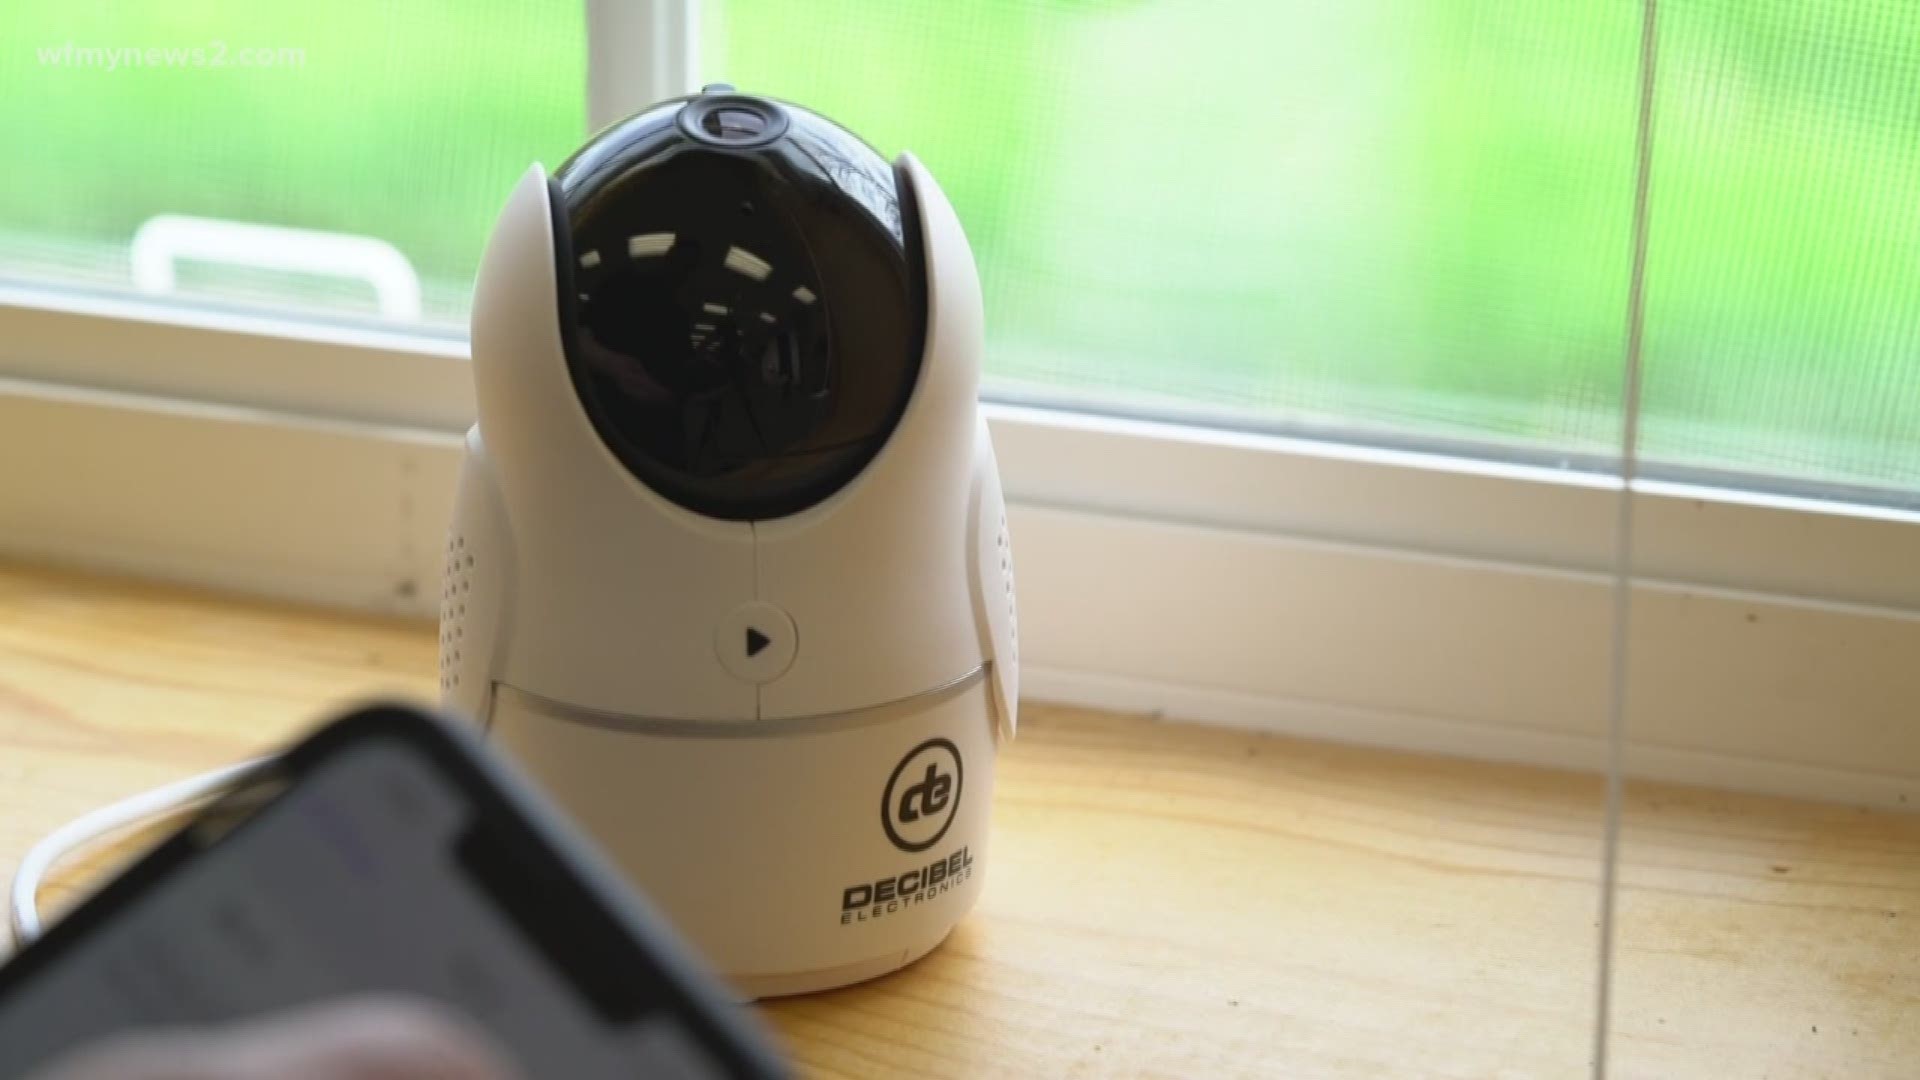 We all need to feel secure. Deal Boss Matt Granite has a bargain on top of the line security cameras that also double as nanny cams, pet cams and baby monitors.